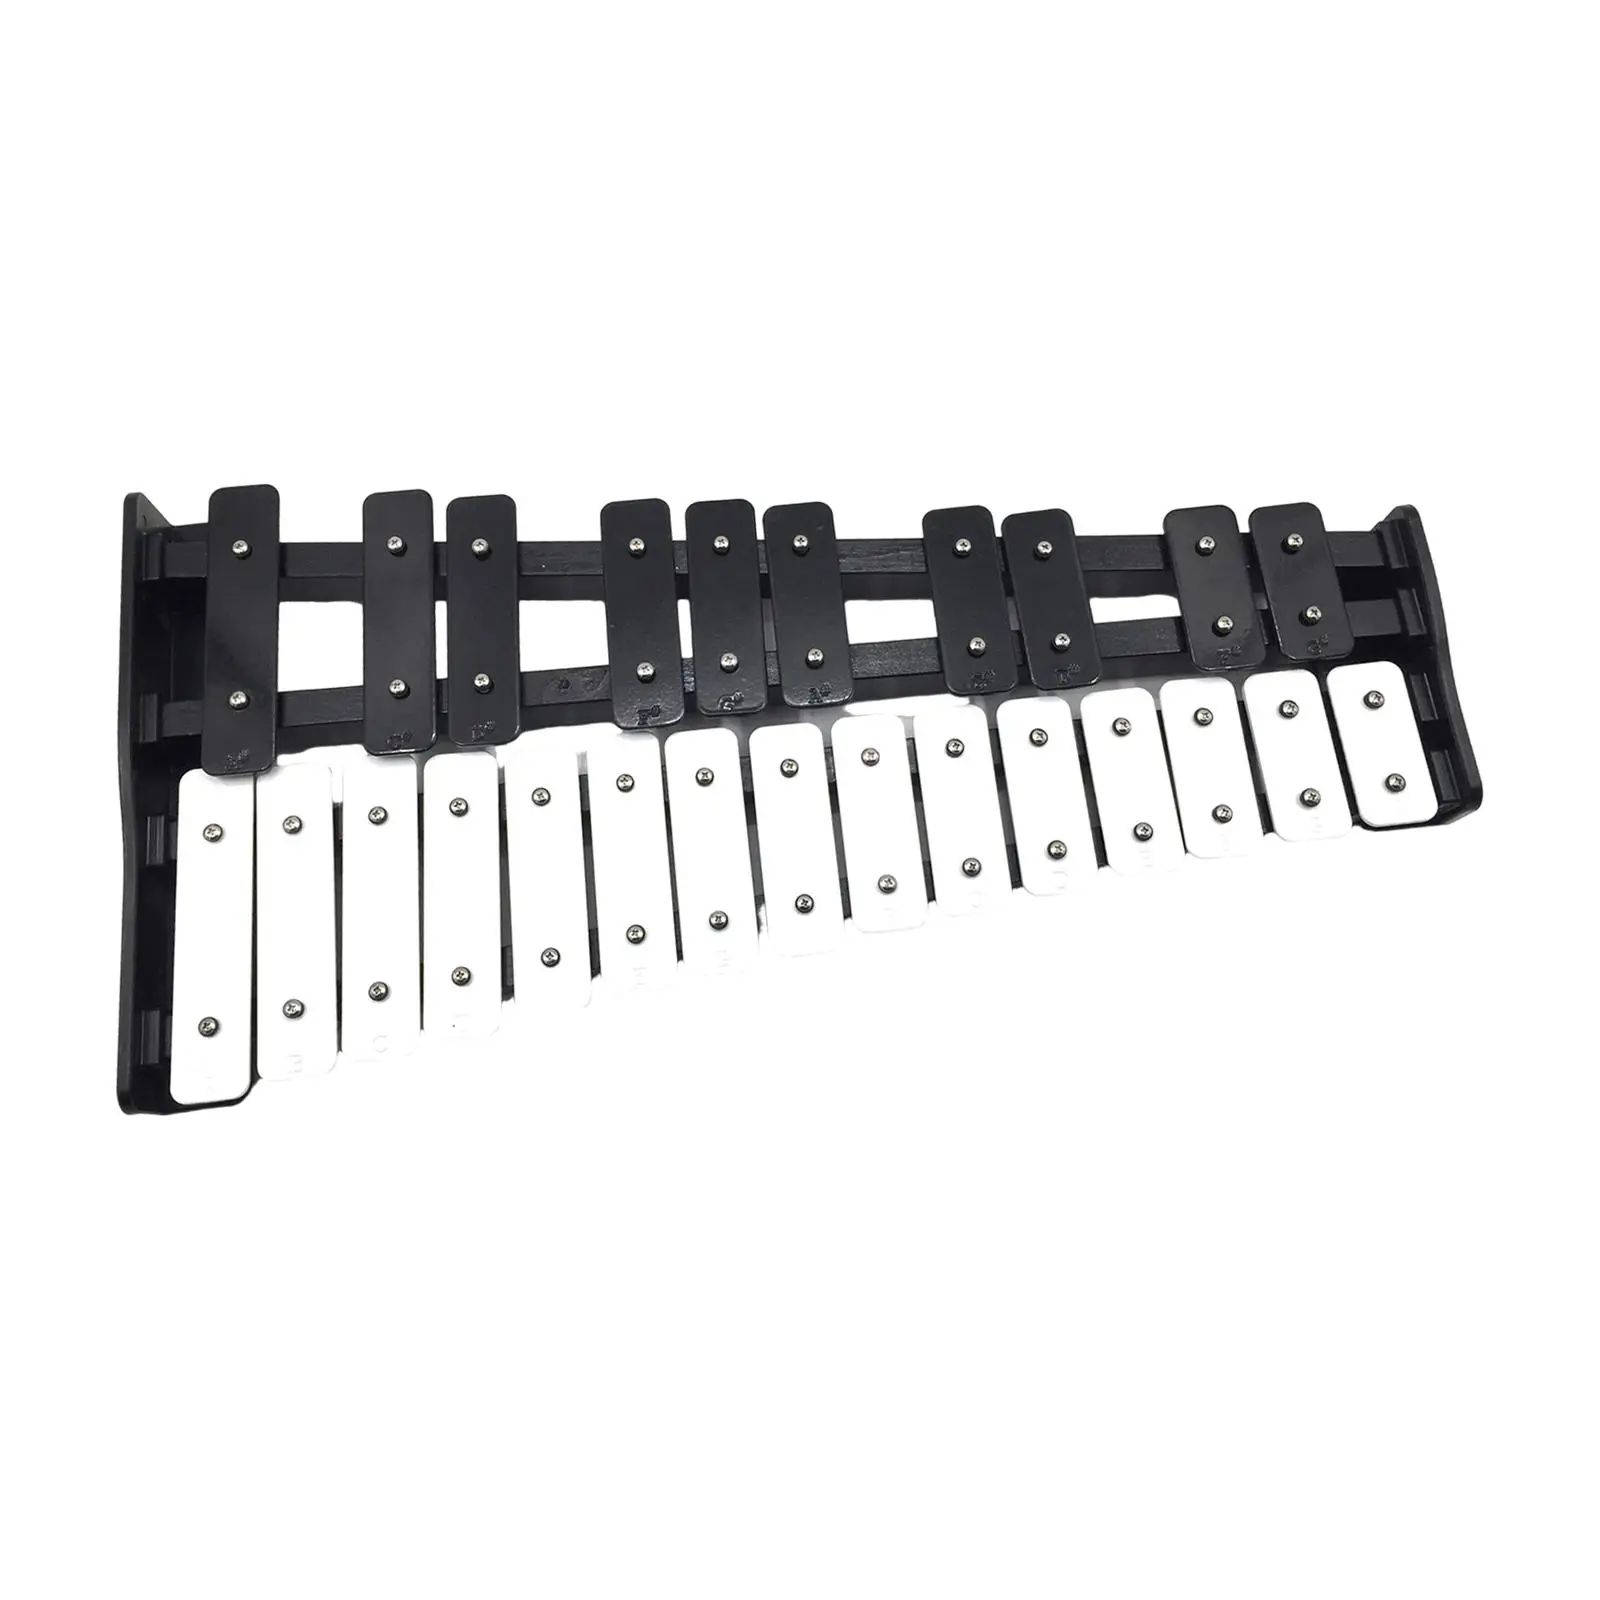 Xylophone Portable Compact for Beginners 25 Key Glockenspiel